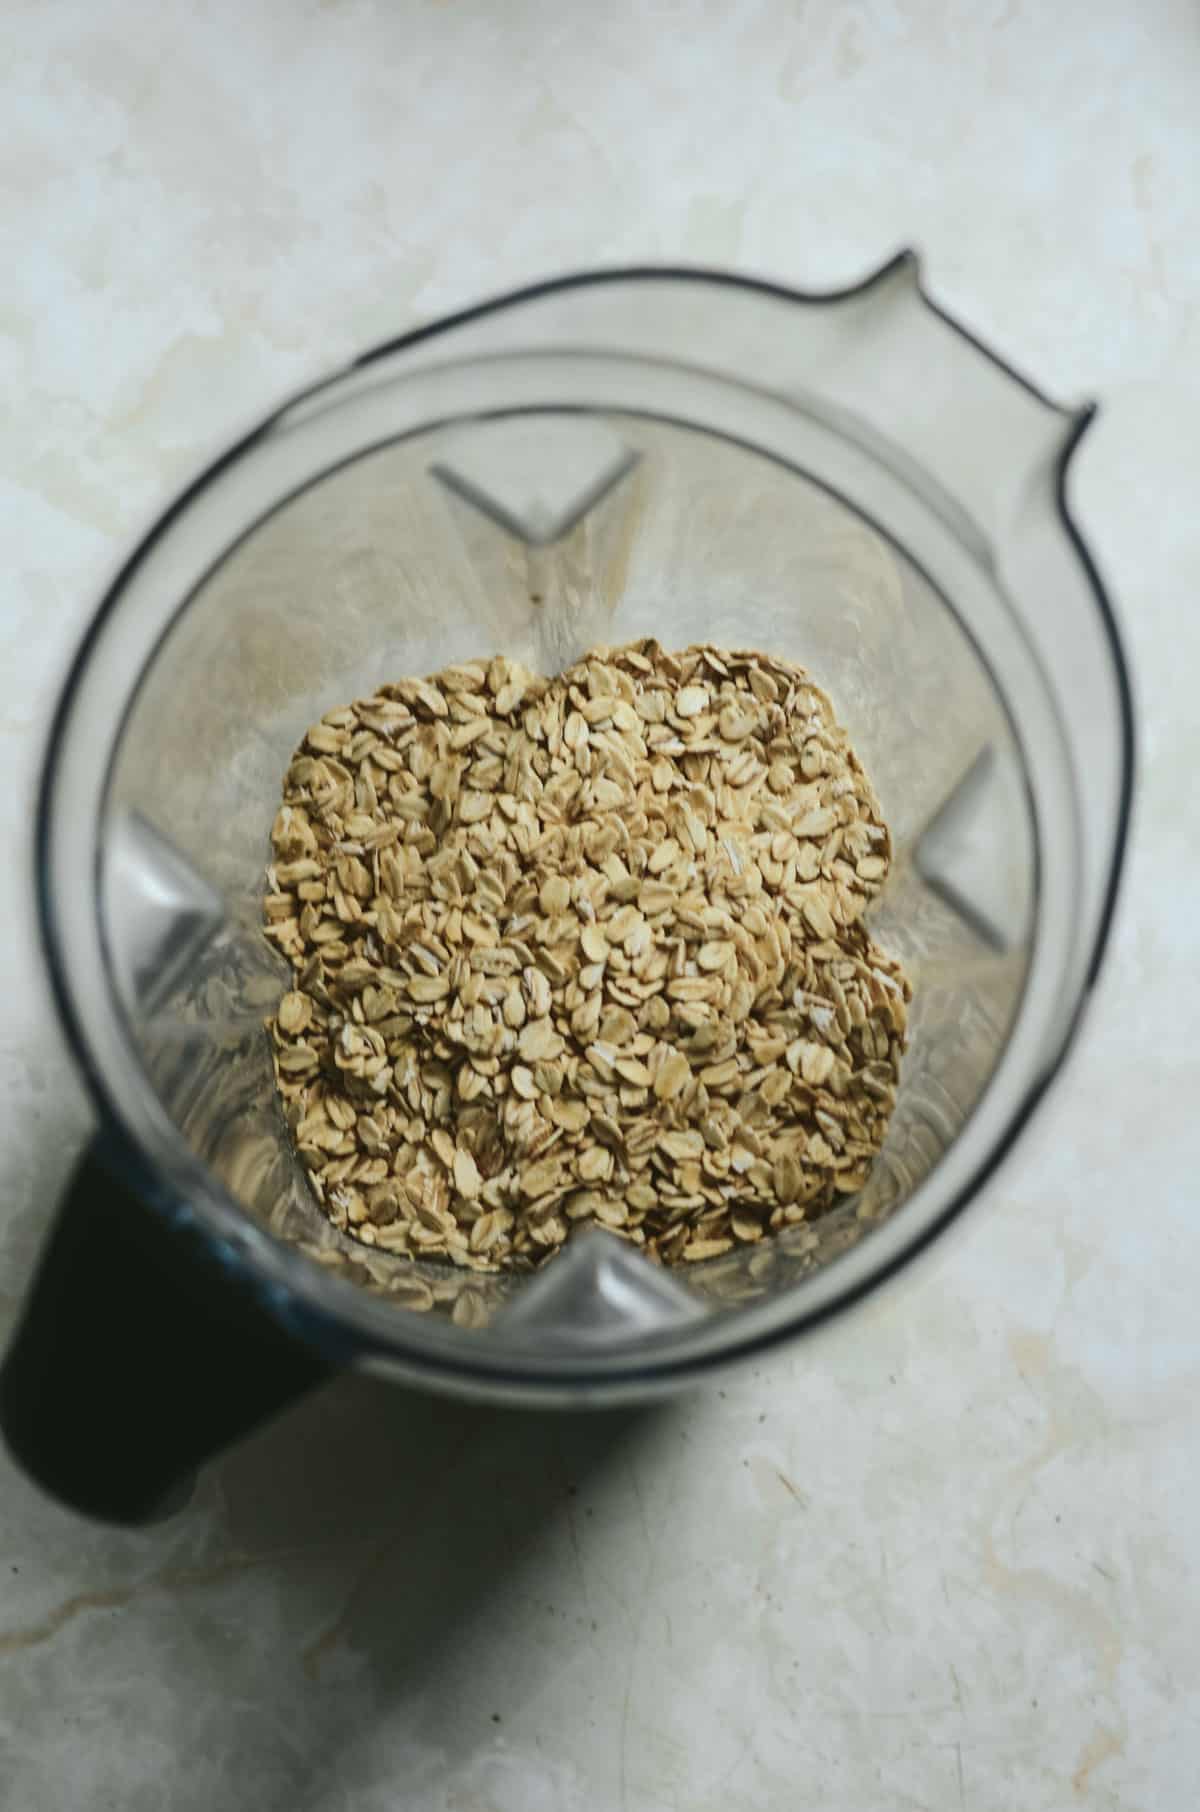 Rolled oats in the blender to make oat flour.